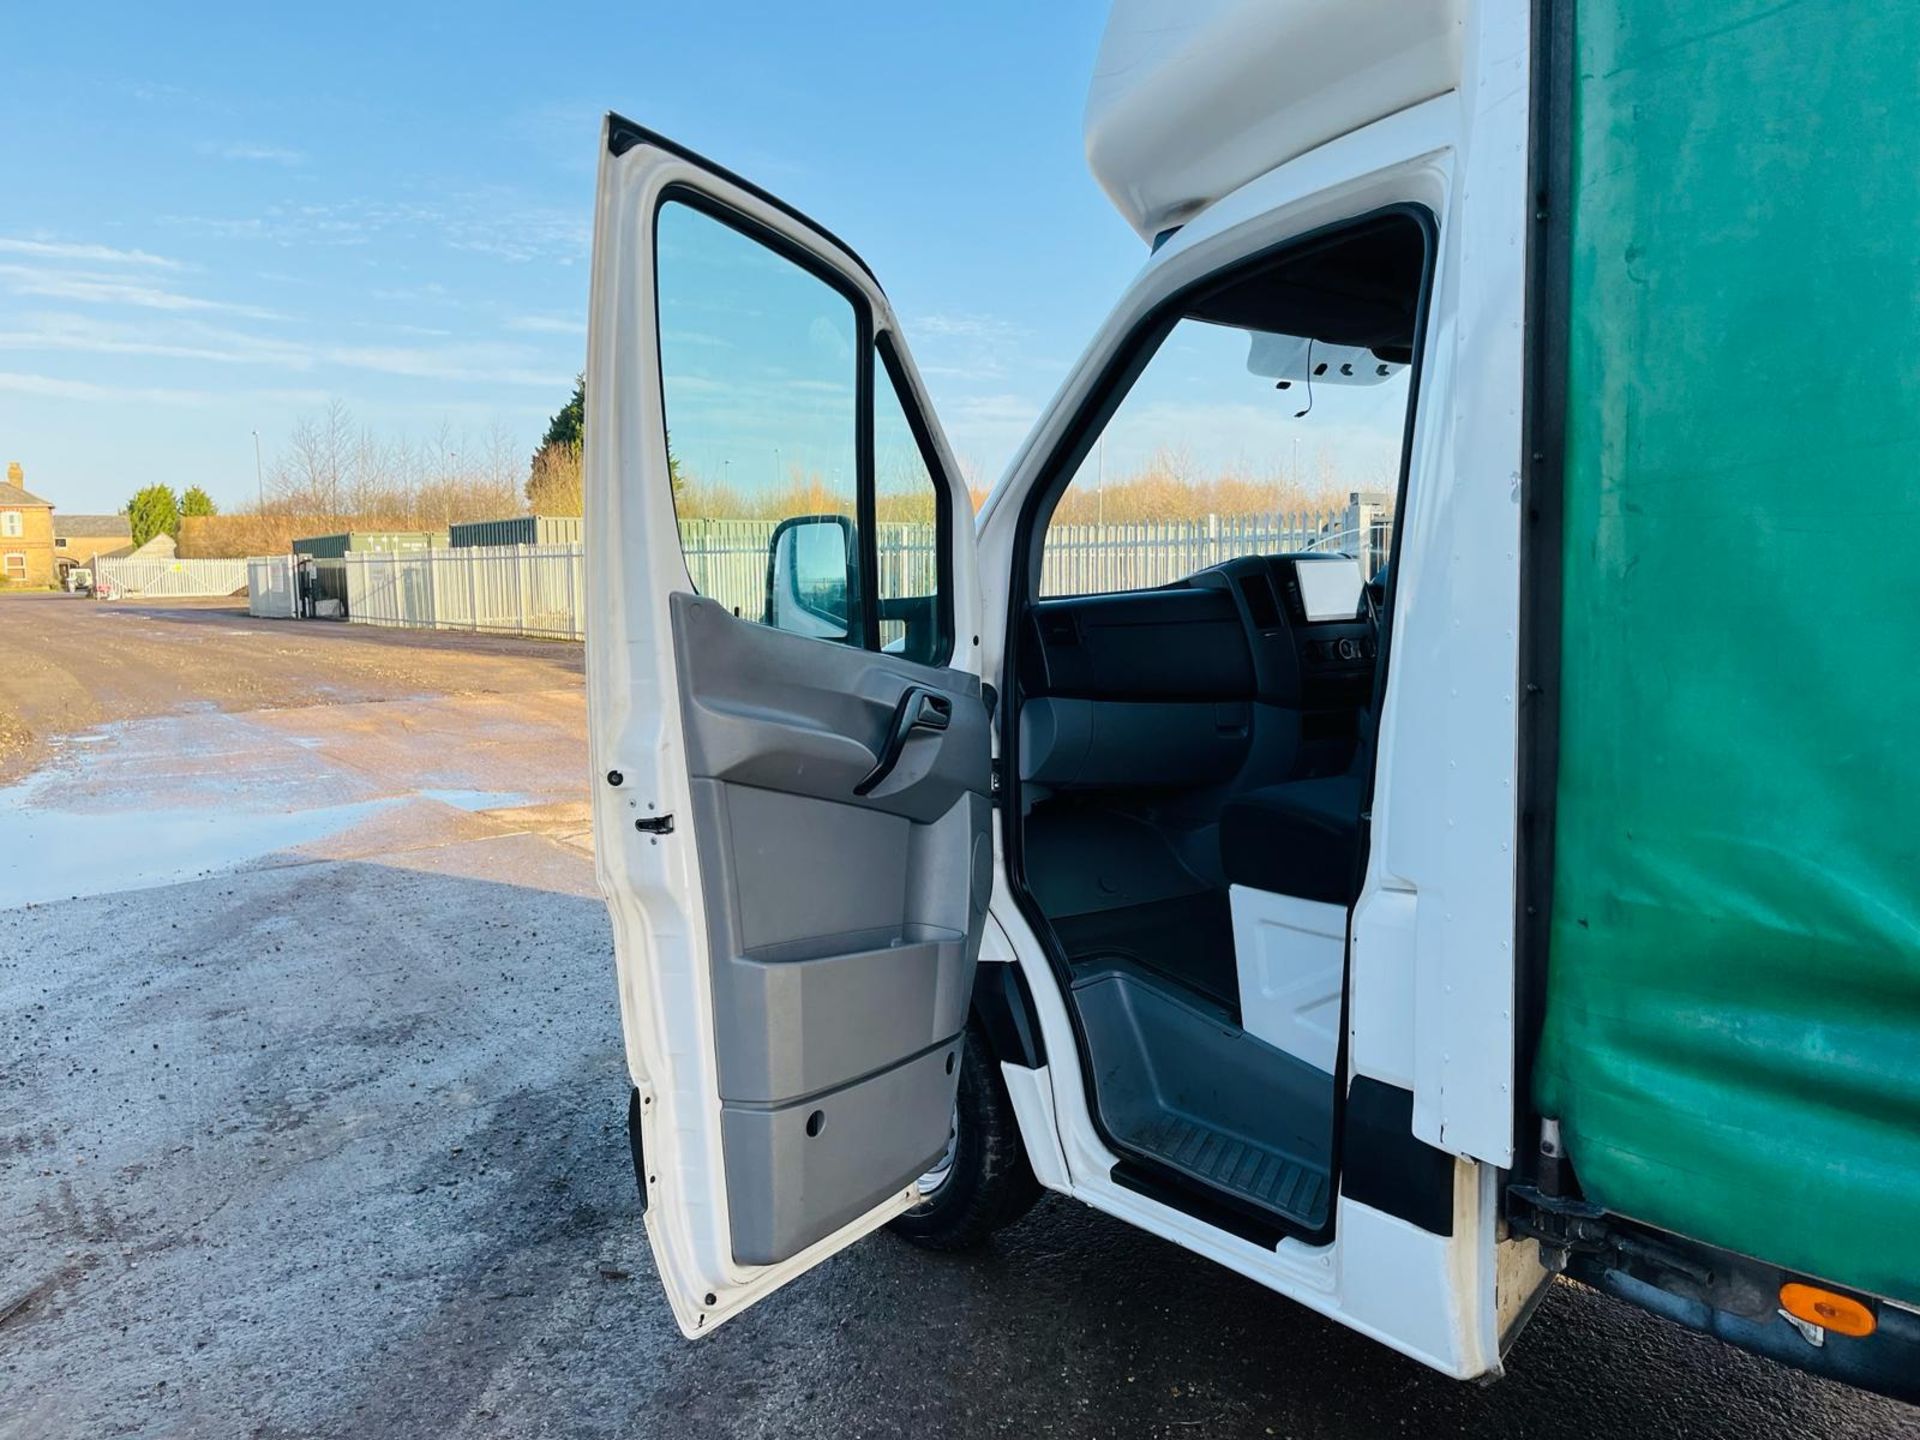 Volkswagen Crafter Curtain Side 2.0L TDI 109 L3 H1 - 2011 '61 Reg'- Air Conditioning -No Vat - Image 22 of 24